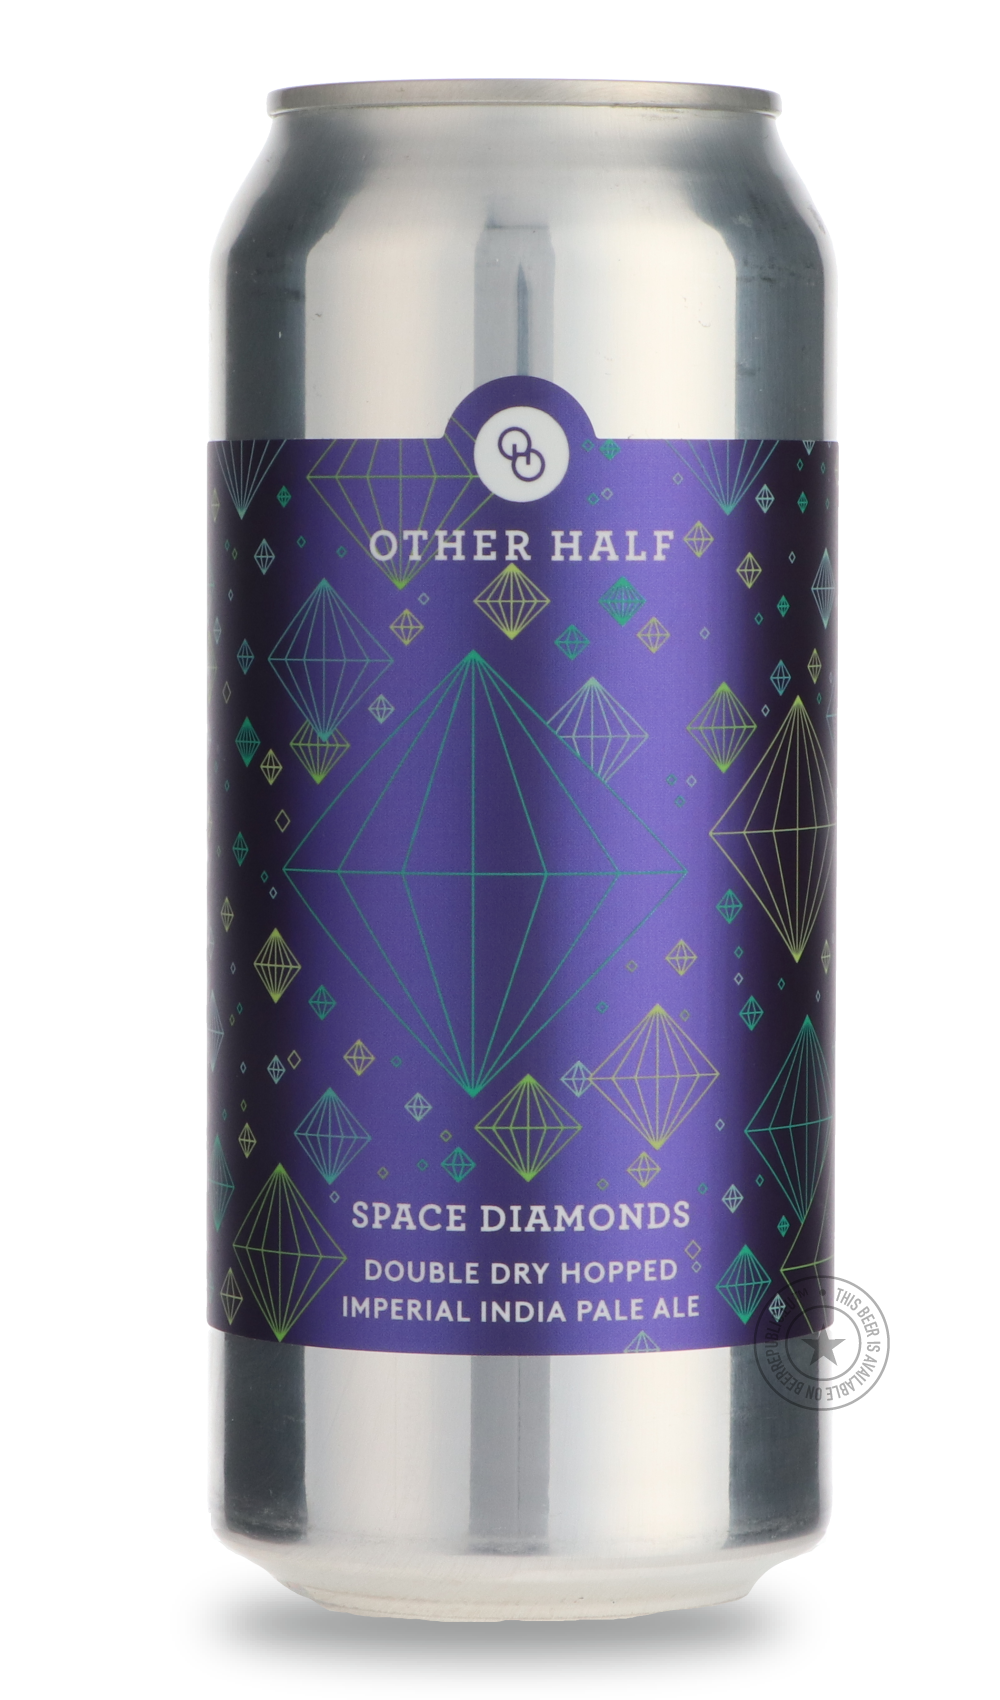 -Other Half- Space Diamonds-IPA- Only @ Beer Republic - The best online beer store for American & Canadian craft beer - Buy beer online from the USA and Canada - Bier online kopen - Amerikaans bier kopen - Craft beer store - Craft beer kopen - Amerikanisch bier kaufen - Bier online kaufen - Acheter biere online - IPA - Stout - Porter - New England IPA - Hazy IPA - Imperial Stout - Barrel Aged - Barrel Aged Imperial Stout - Brown - Dark beer - Blond - Blonde - Pilsner - Lager - Wheat - Weizen - Amber - Barle